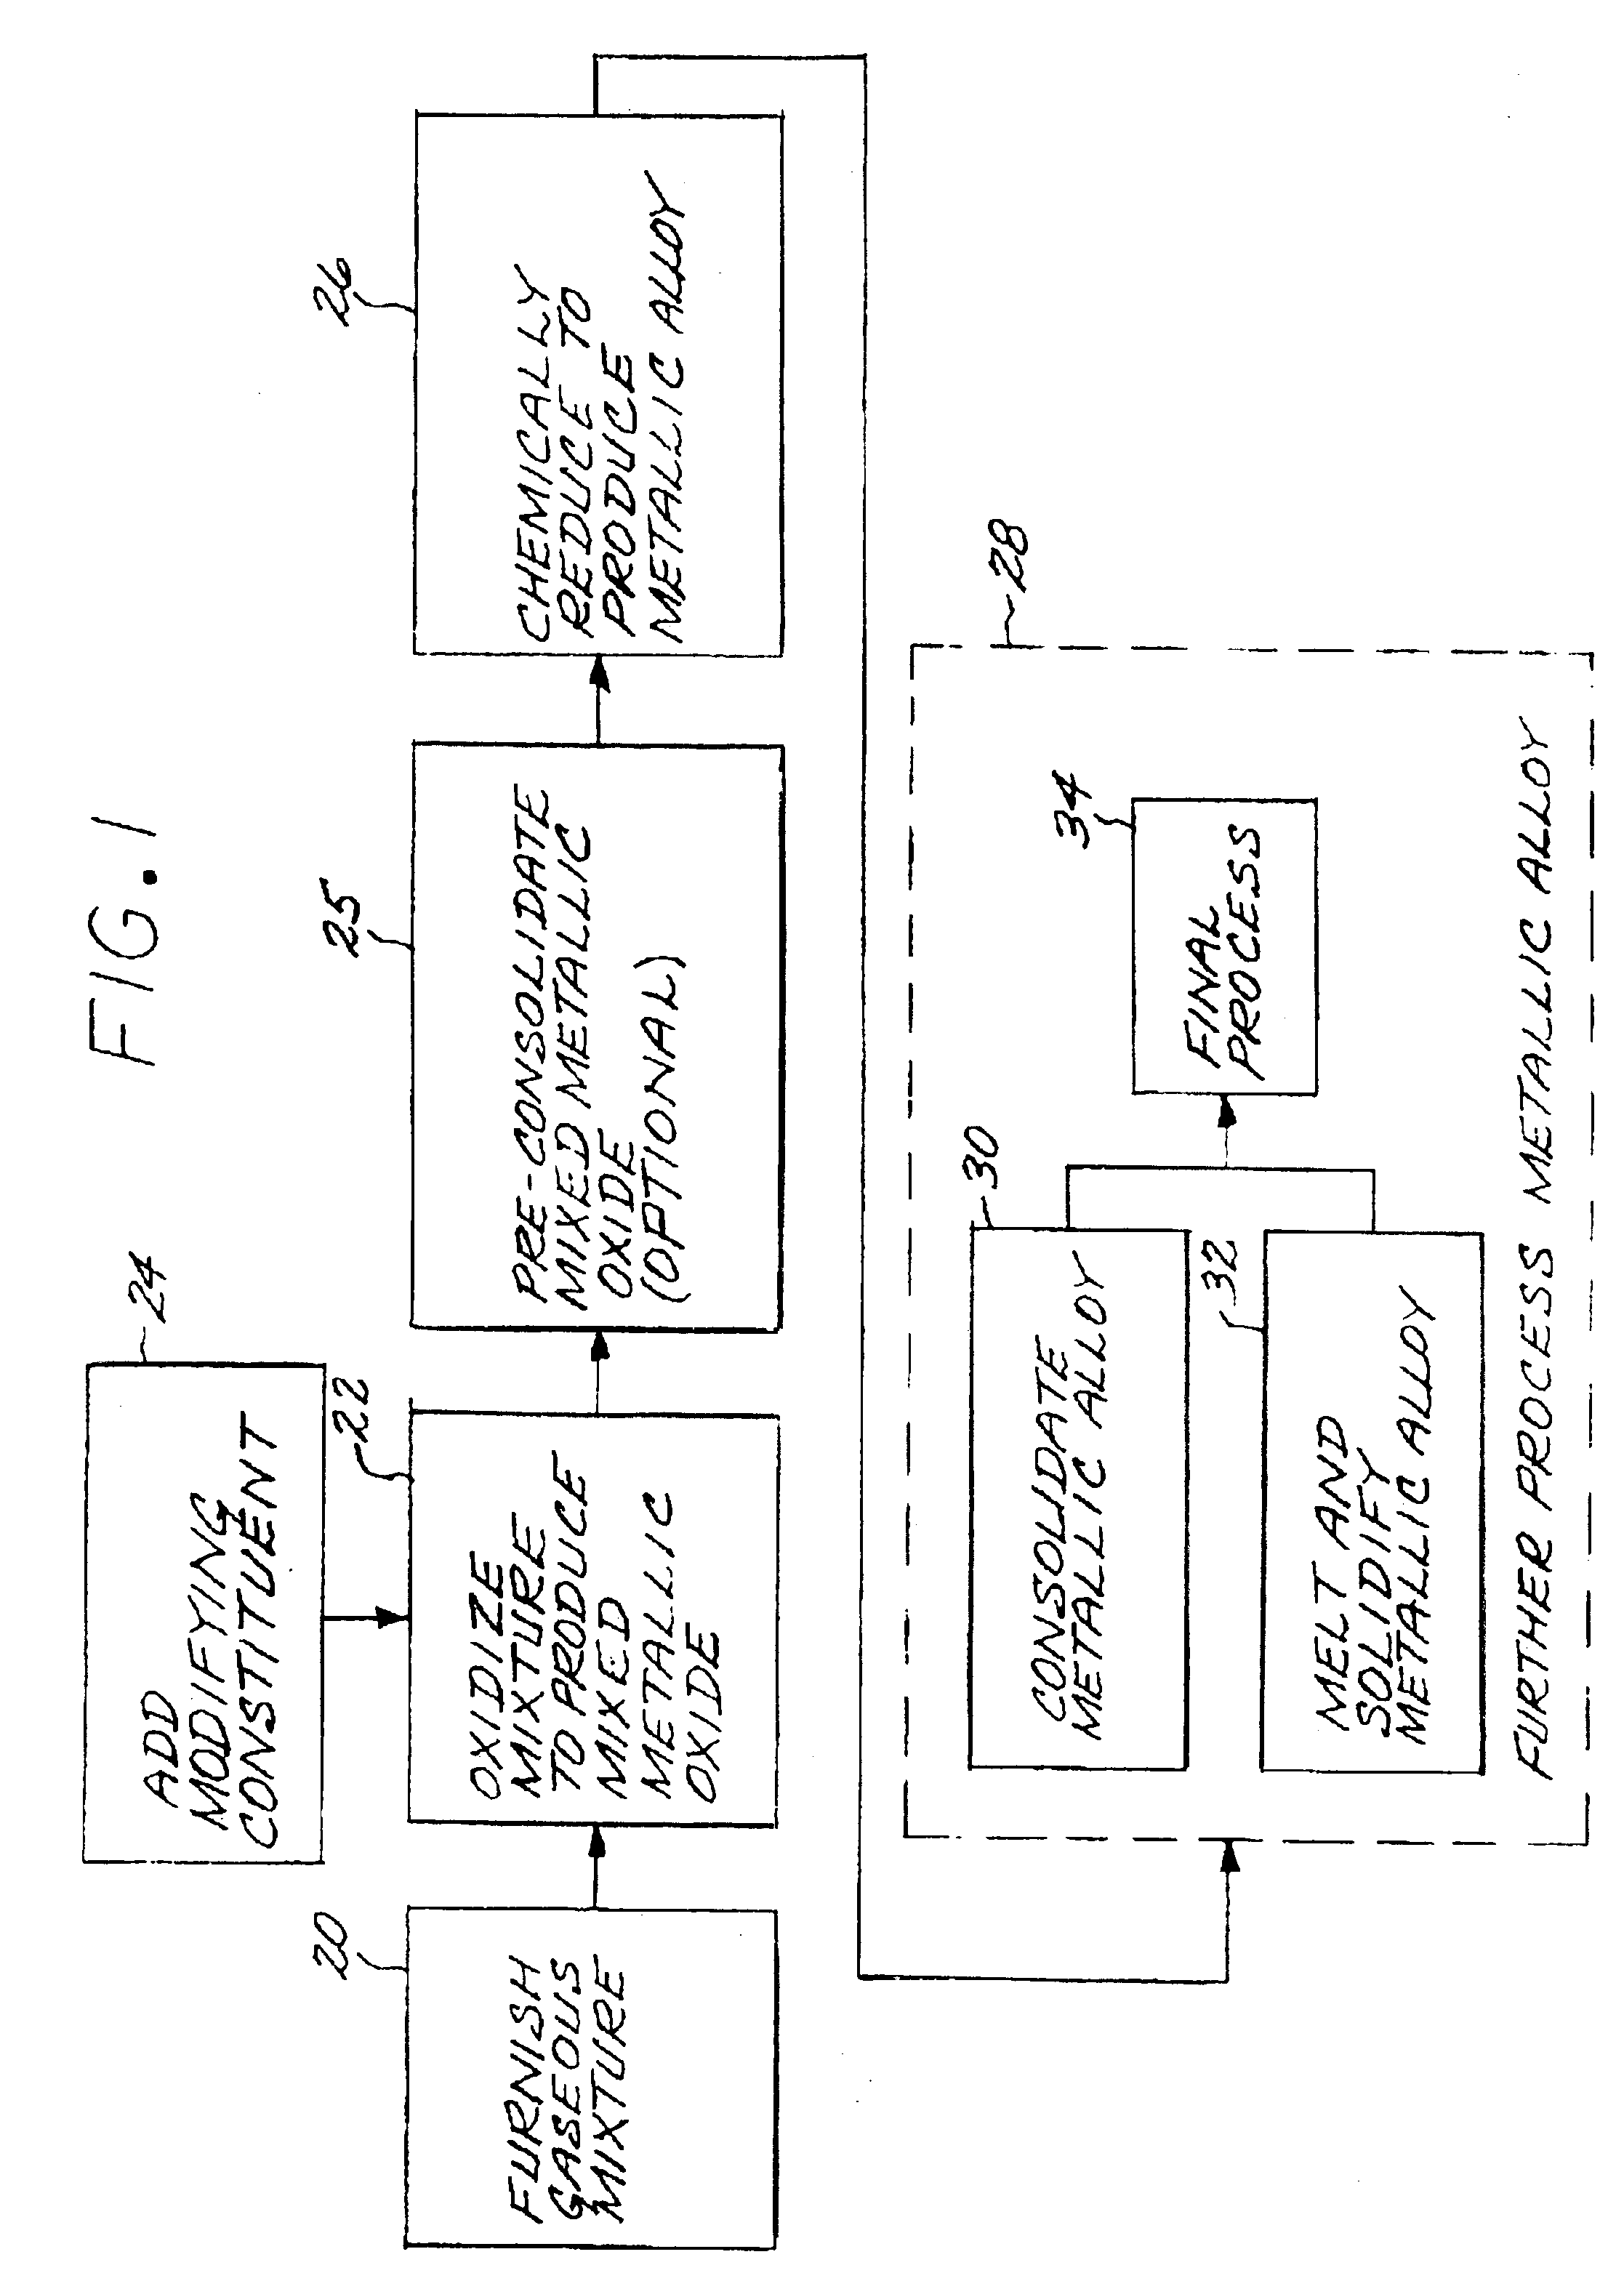 Method for producing a metallic alloy by the oxidation and chemical reduction of gaseous non-oxide precursor compounds